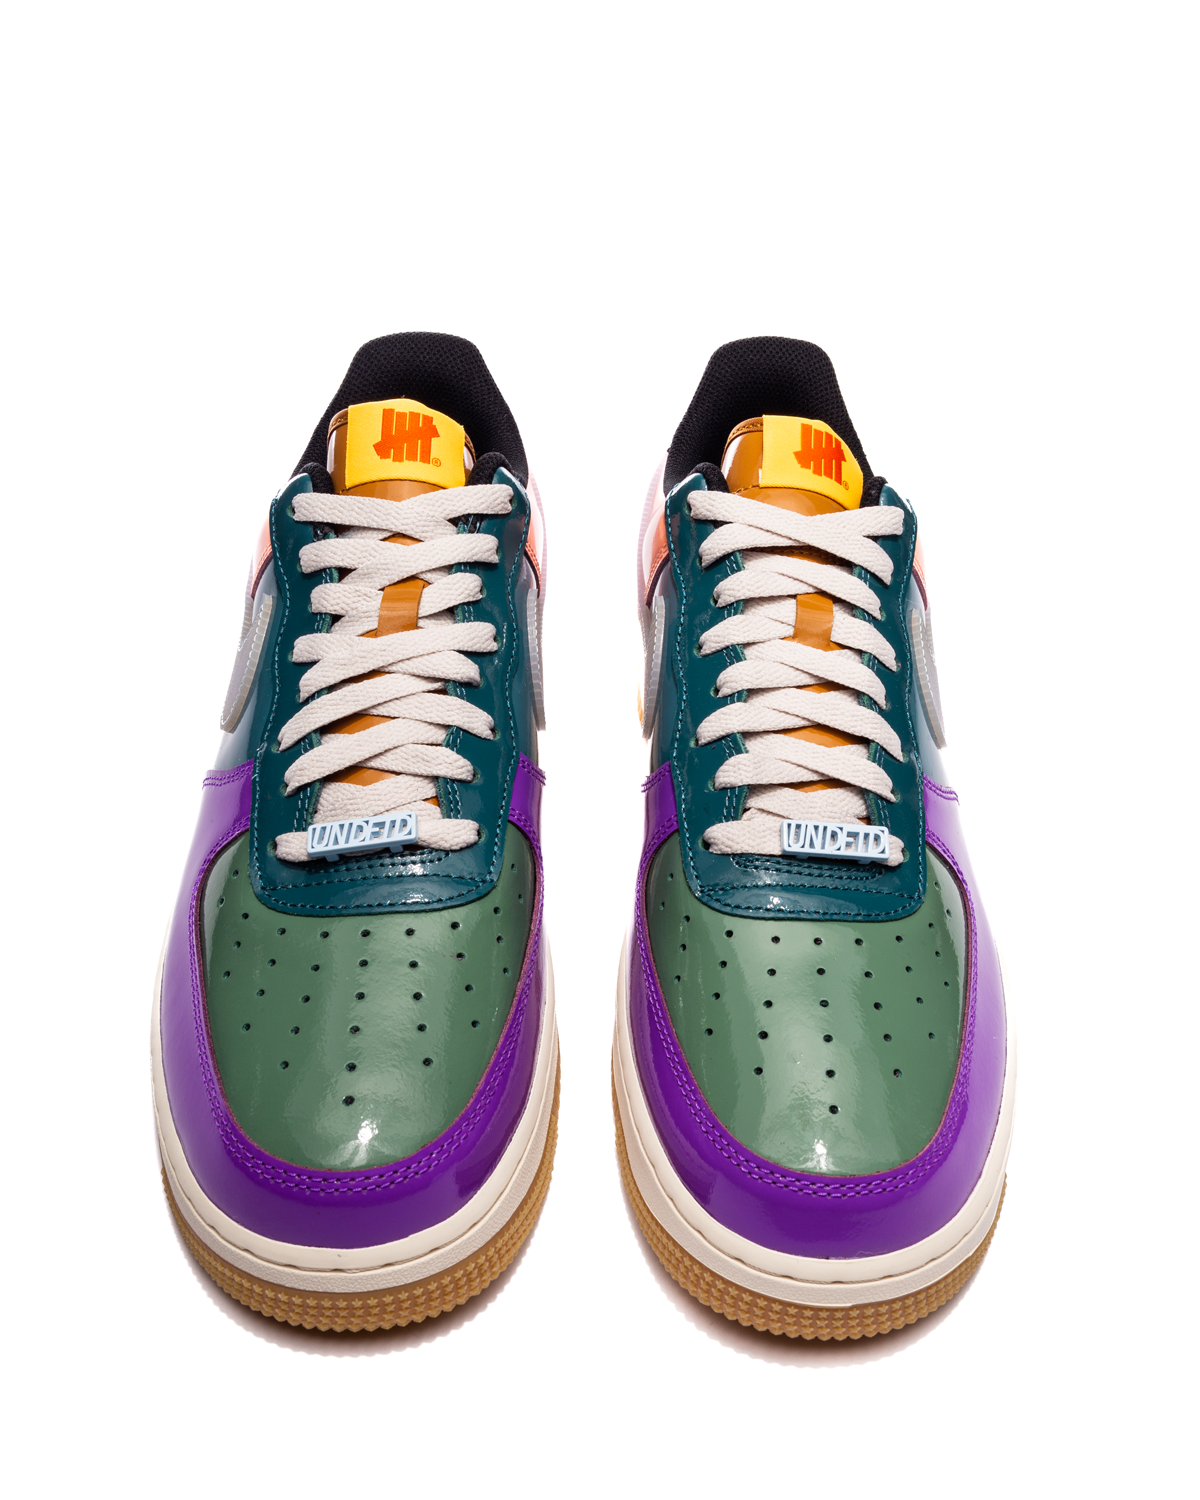 UNDEFEATED x Air Force 1 Low Wild Berry/Celestine Blue